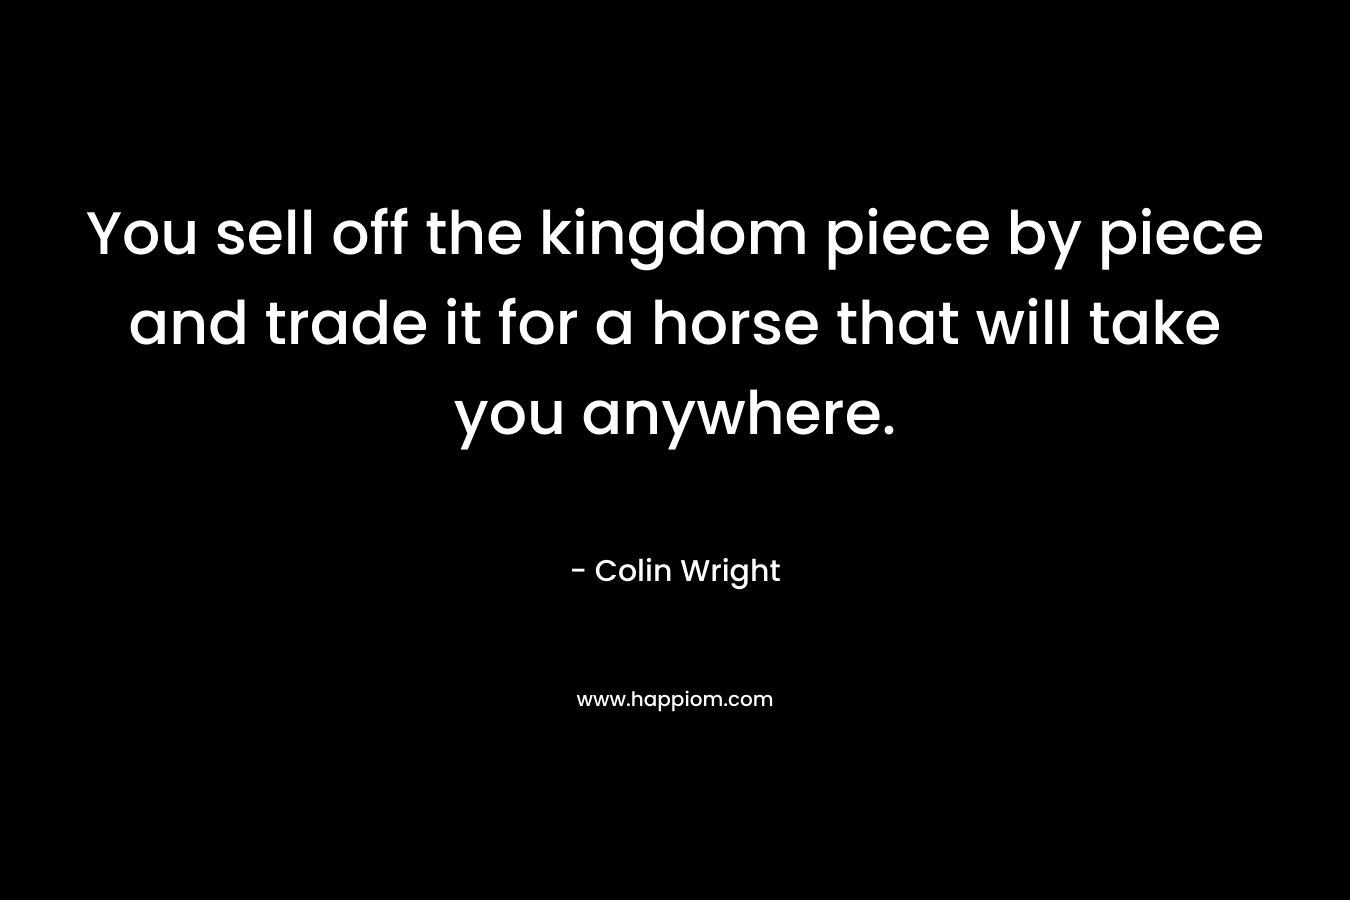 You sell off the kingdom piece by piece and trade it for a horse that will take you anywhere.